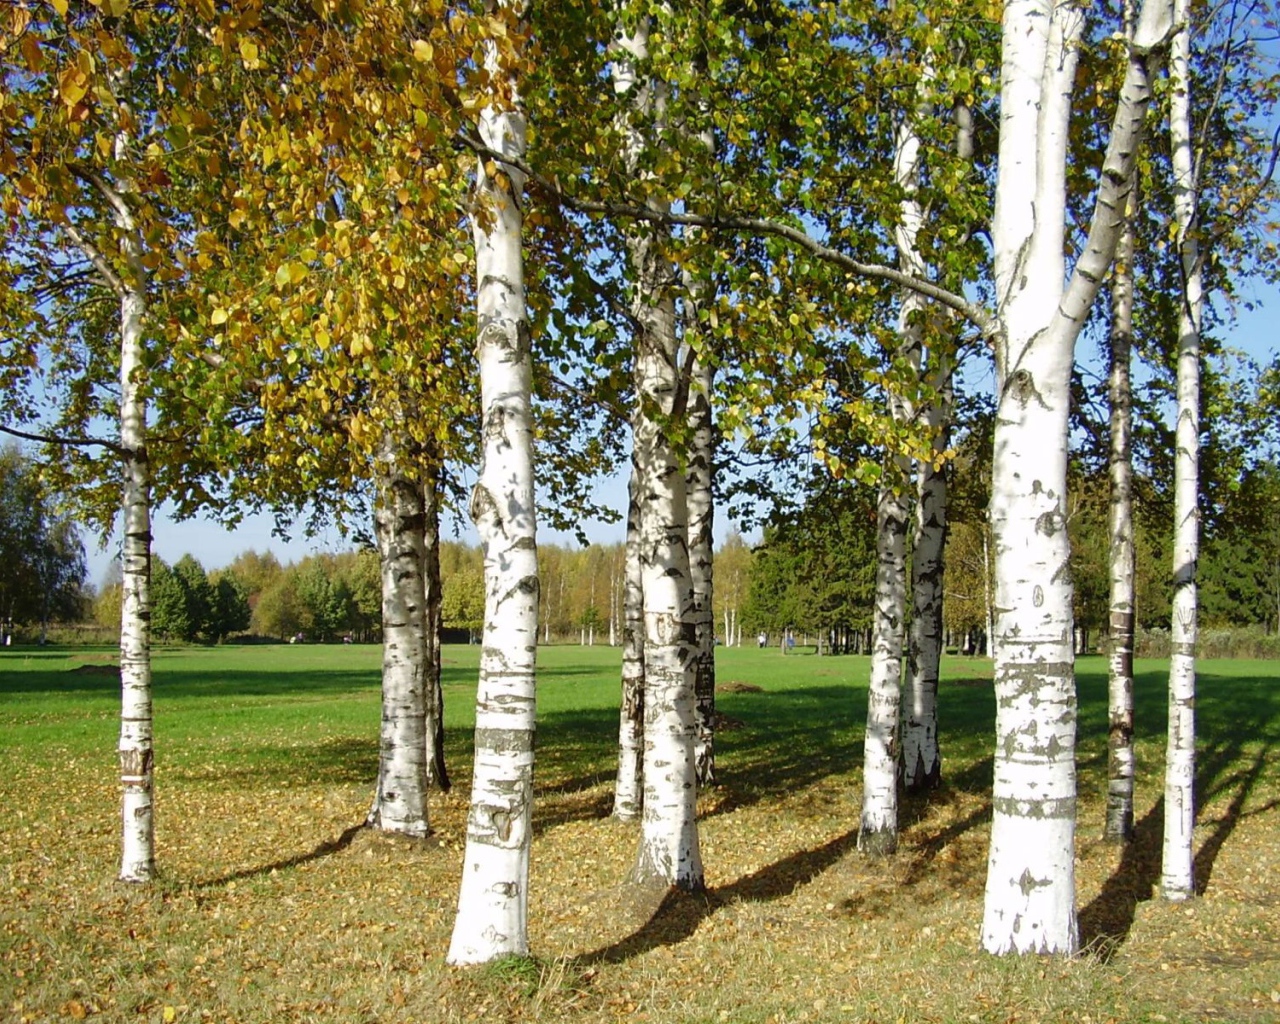 Birch trees on the glade